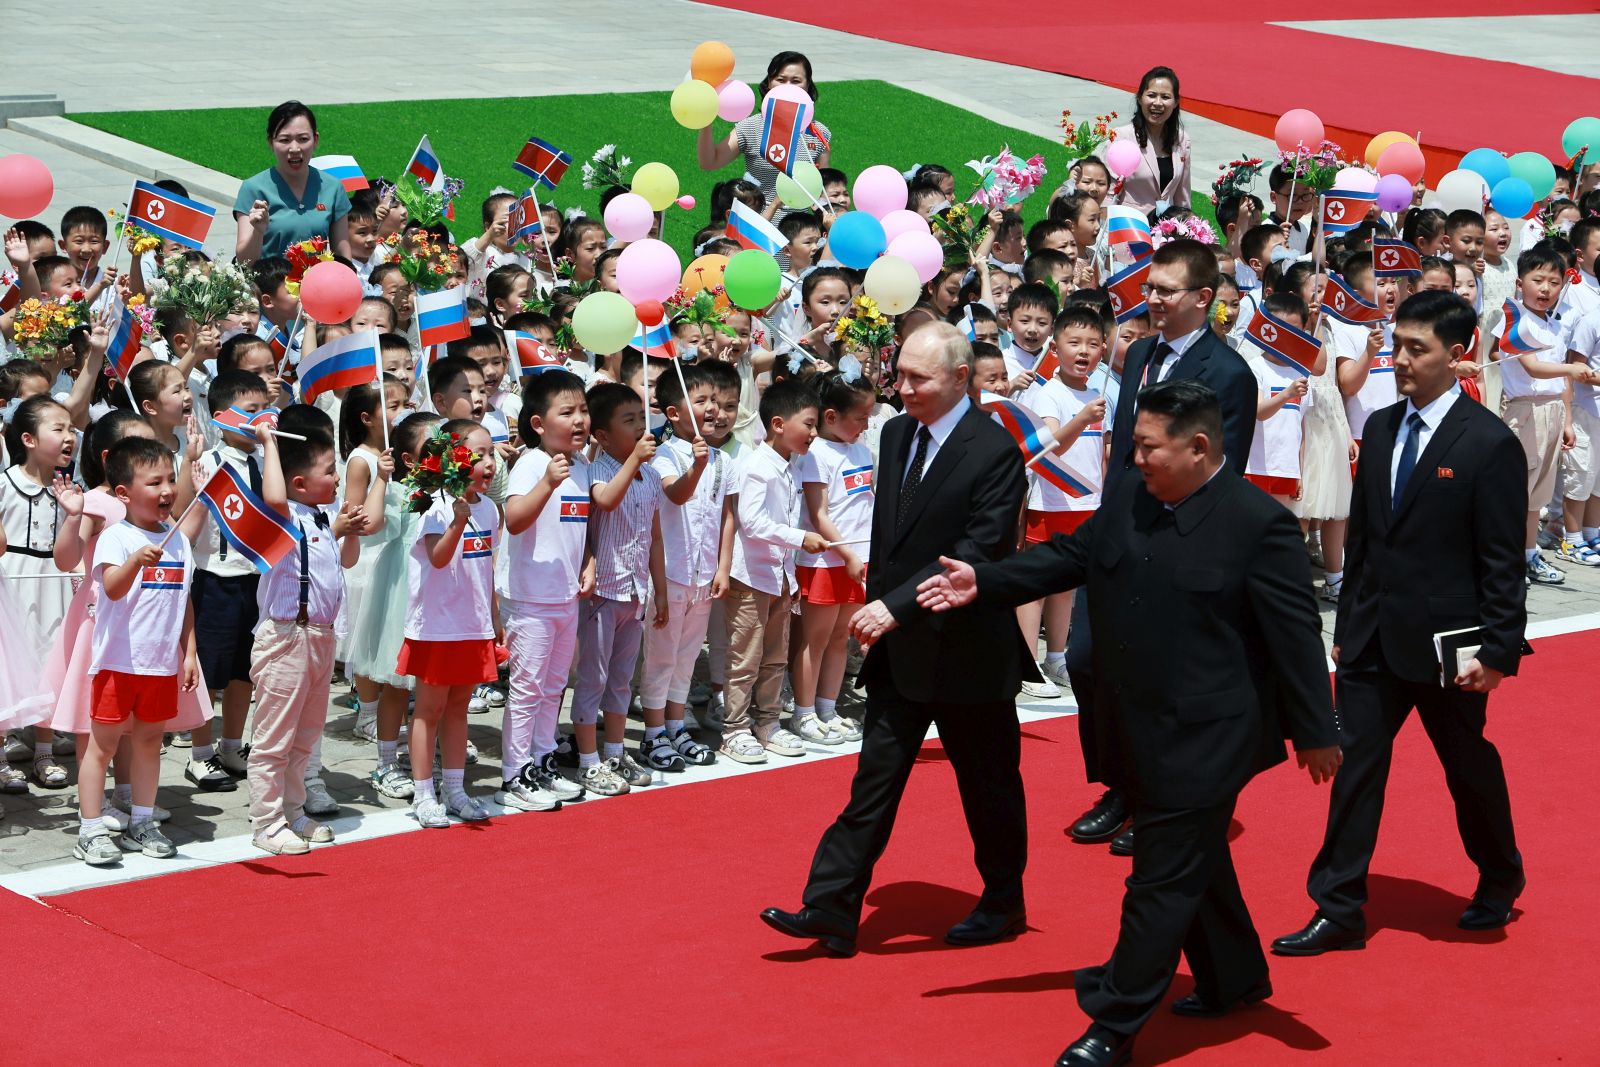 epa11421544 Russian President Vladimir Putin (C) and North Korean leader Kim Jong Un (2-R) attend an official welcoming ceremony during their meeting in Pyongyang, North Korea, 19 June 2024. The Russian president is on a state visit to North Korea from 18-19 June at the invitation of the North Korean leader. He last visited North Korea in 2000, shortly after his first inauguration as president.  EPA/GAVRIIL GRIGOROV / SPUTNIK / KREMLIN POOL MANDATORY CREDIT